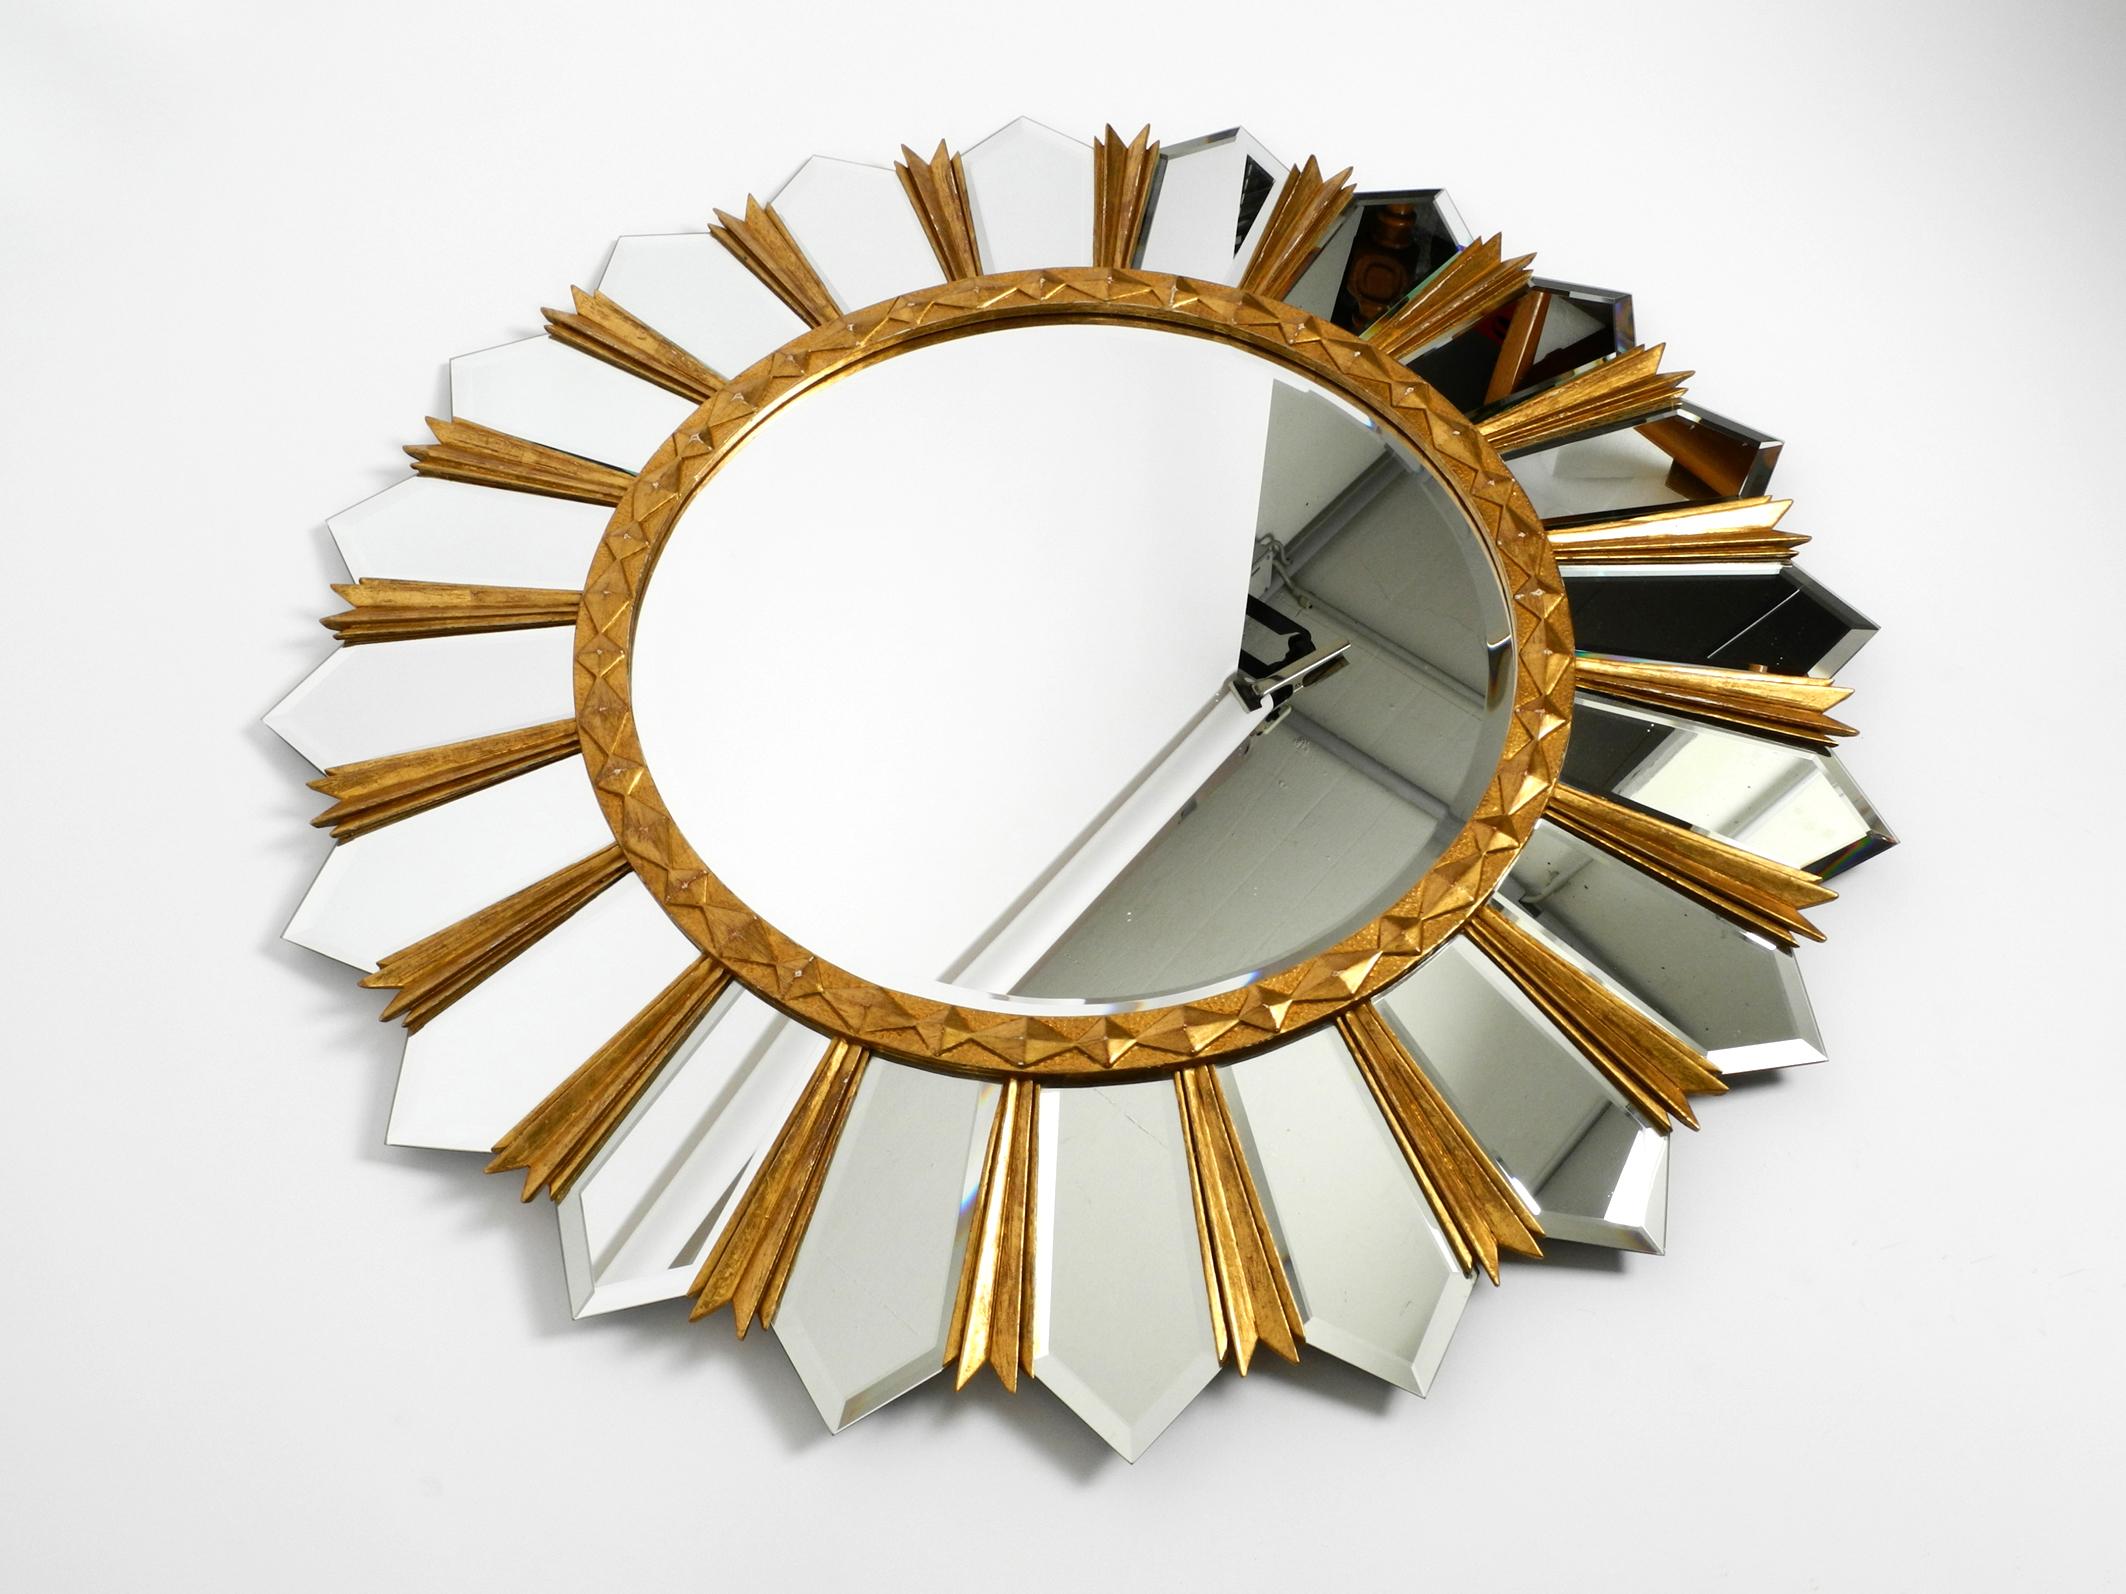 Huge gilded XXL Regency sunburst wall mirror.
Beautiful Italian design from the 1980s.
Very high quality and heavy handcrafted. Lots of nice details.
All the wood is gilded on the front. The round mirror inside is faceted.
The outer mirror parts